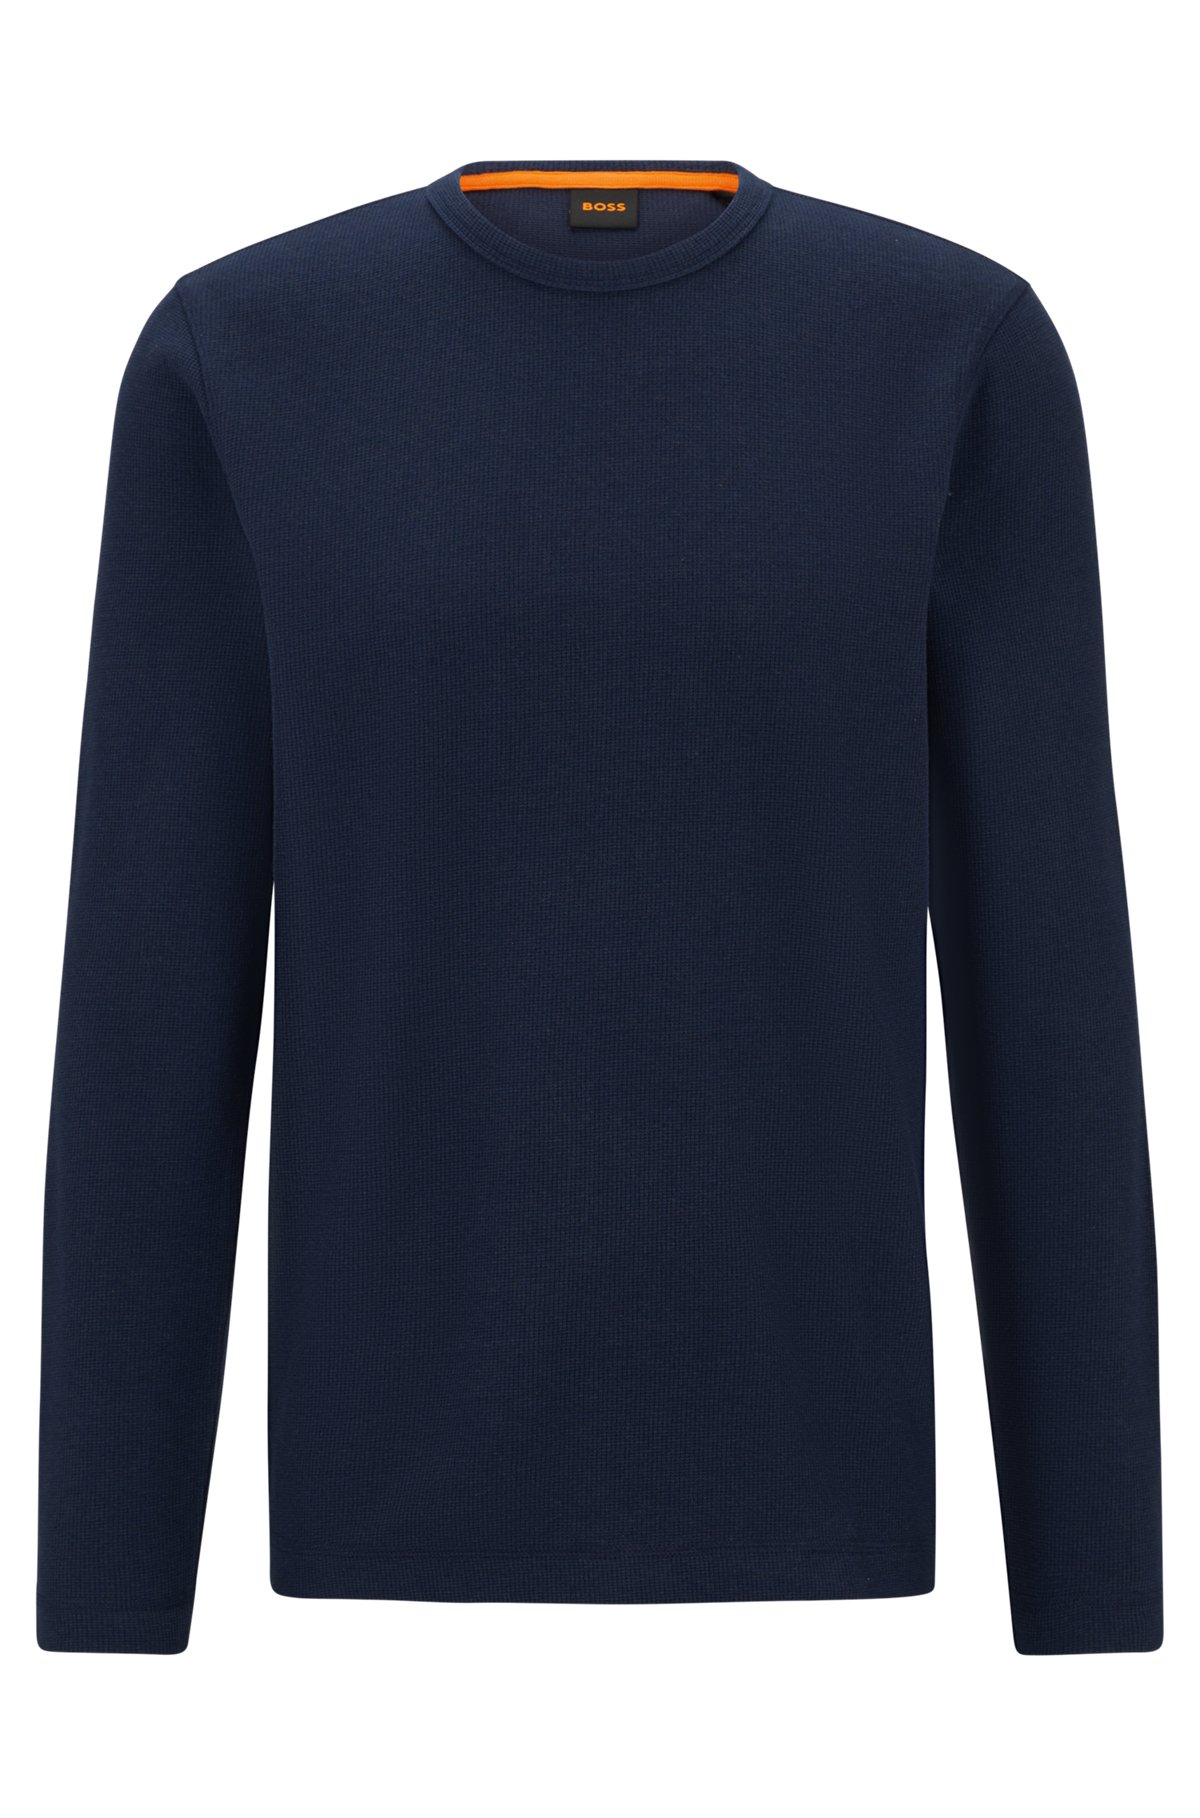 Long-sleeved T-shirt in a waffle-structured cotton blend, Dark Blue